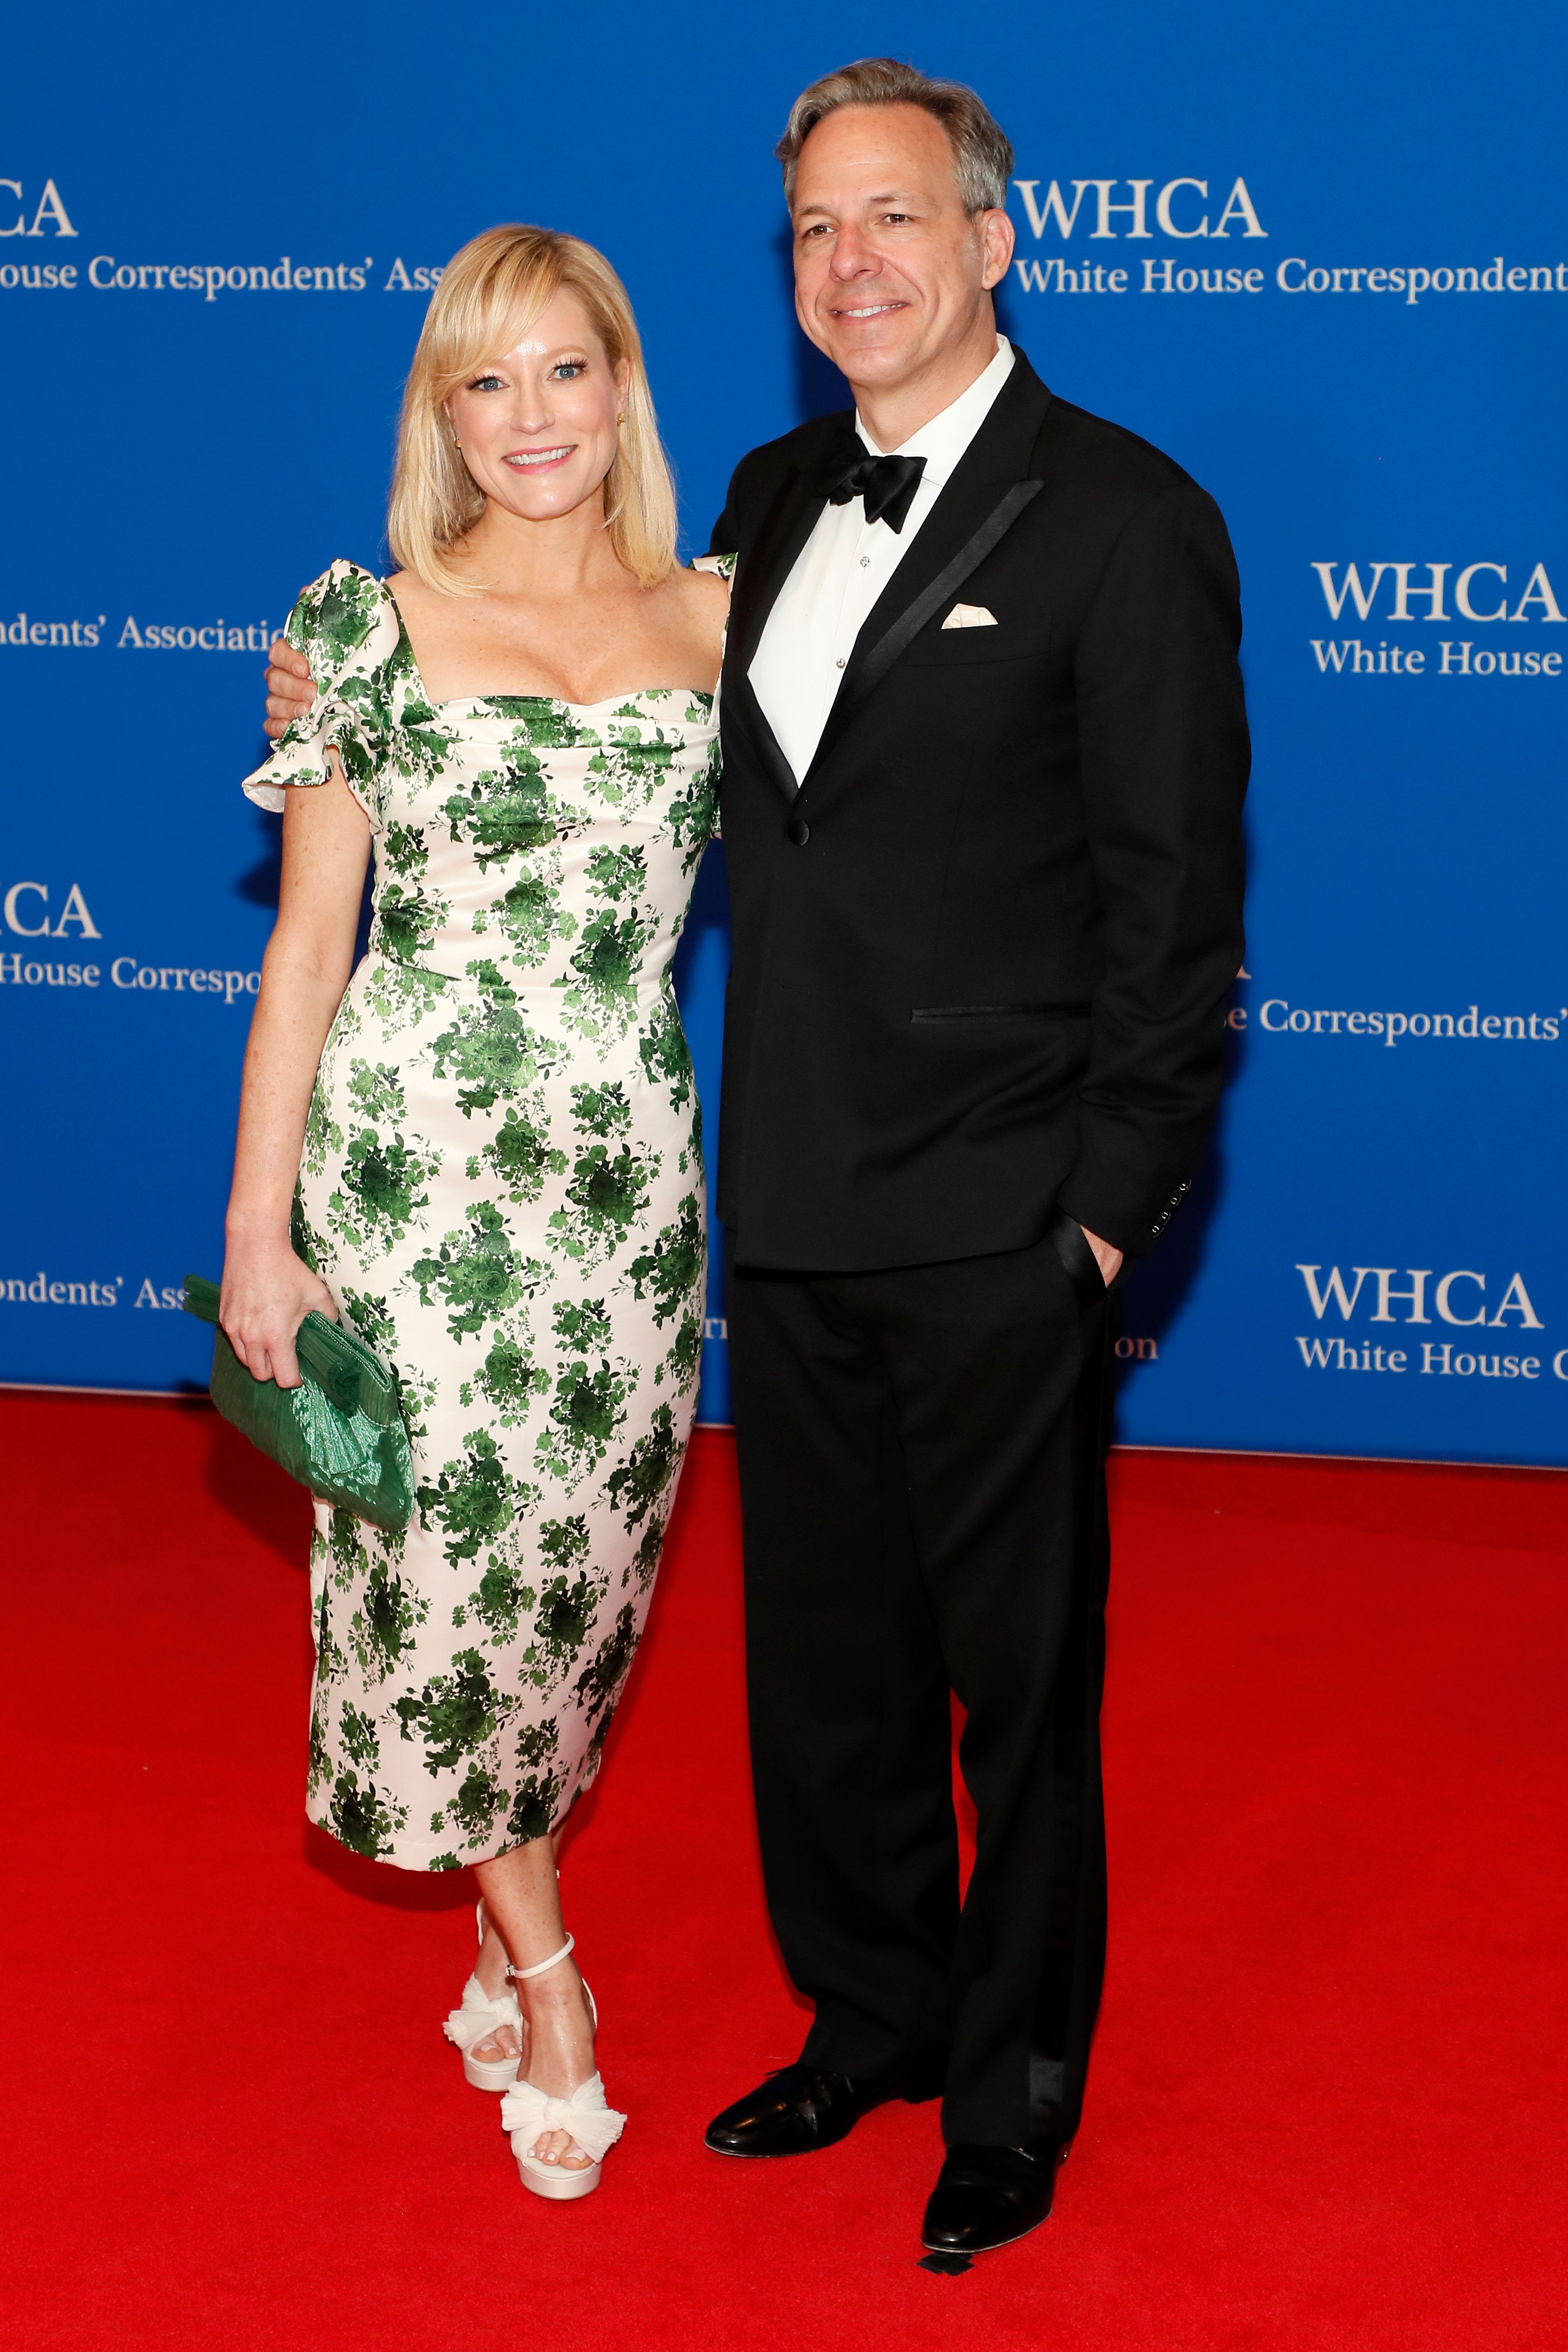 Jennifer Marie Brown and Jake Tapper at the 2022 White House Correspondents' Association Dinner on April 30, 2022, in Washington, D.C. | Source: Getty Images